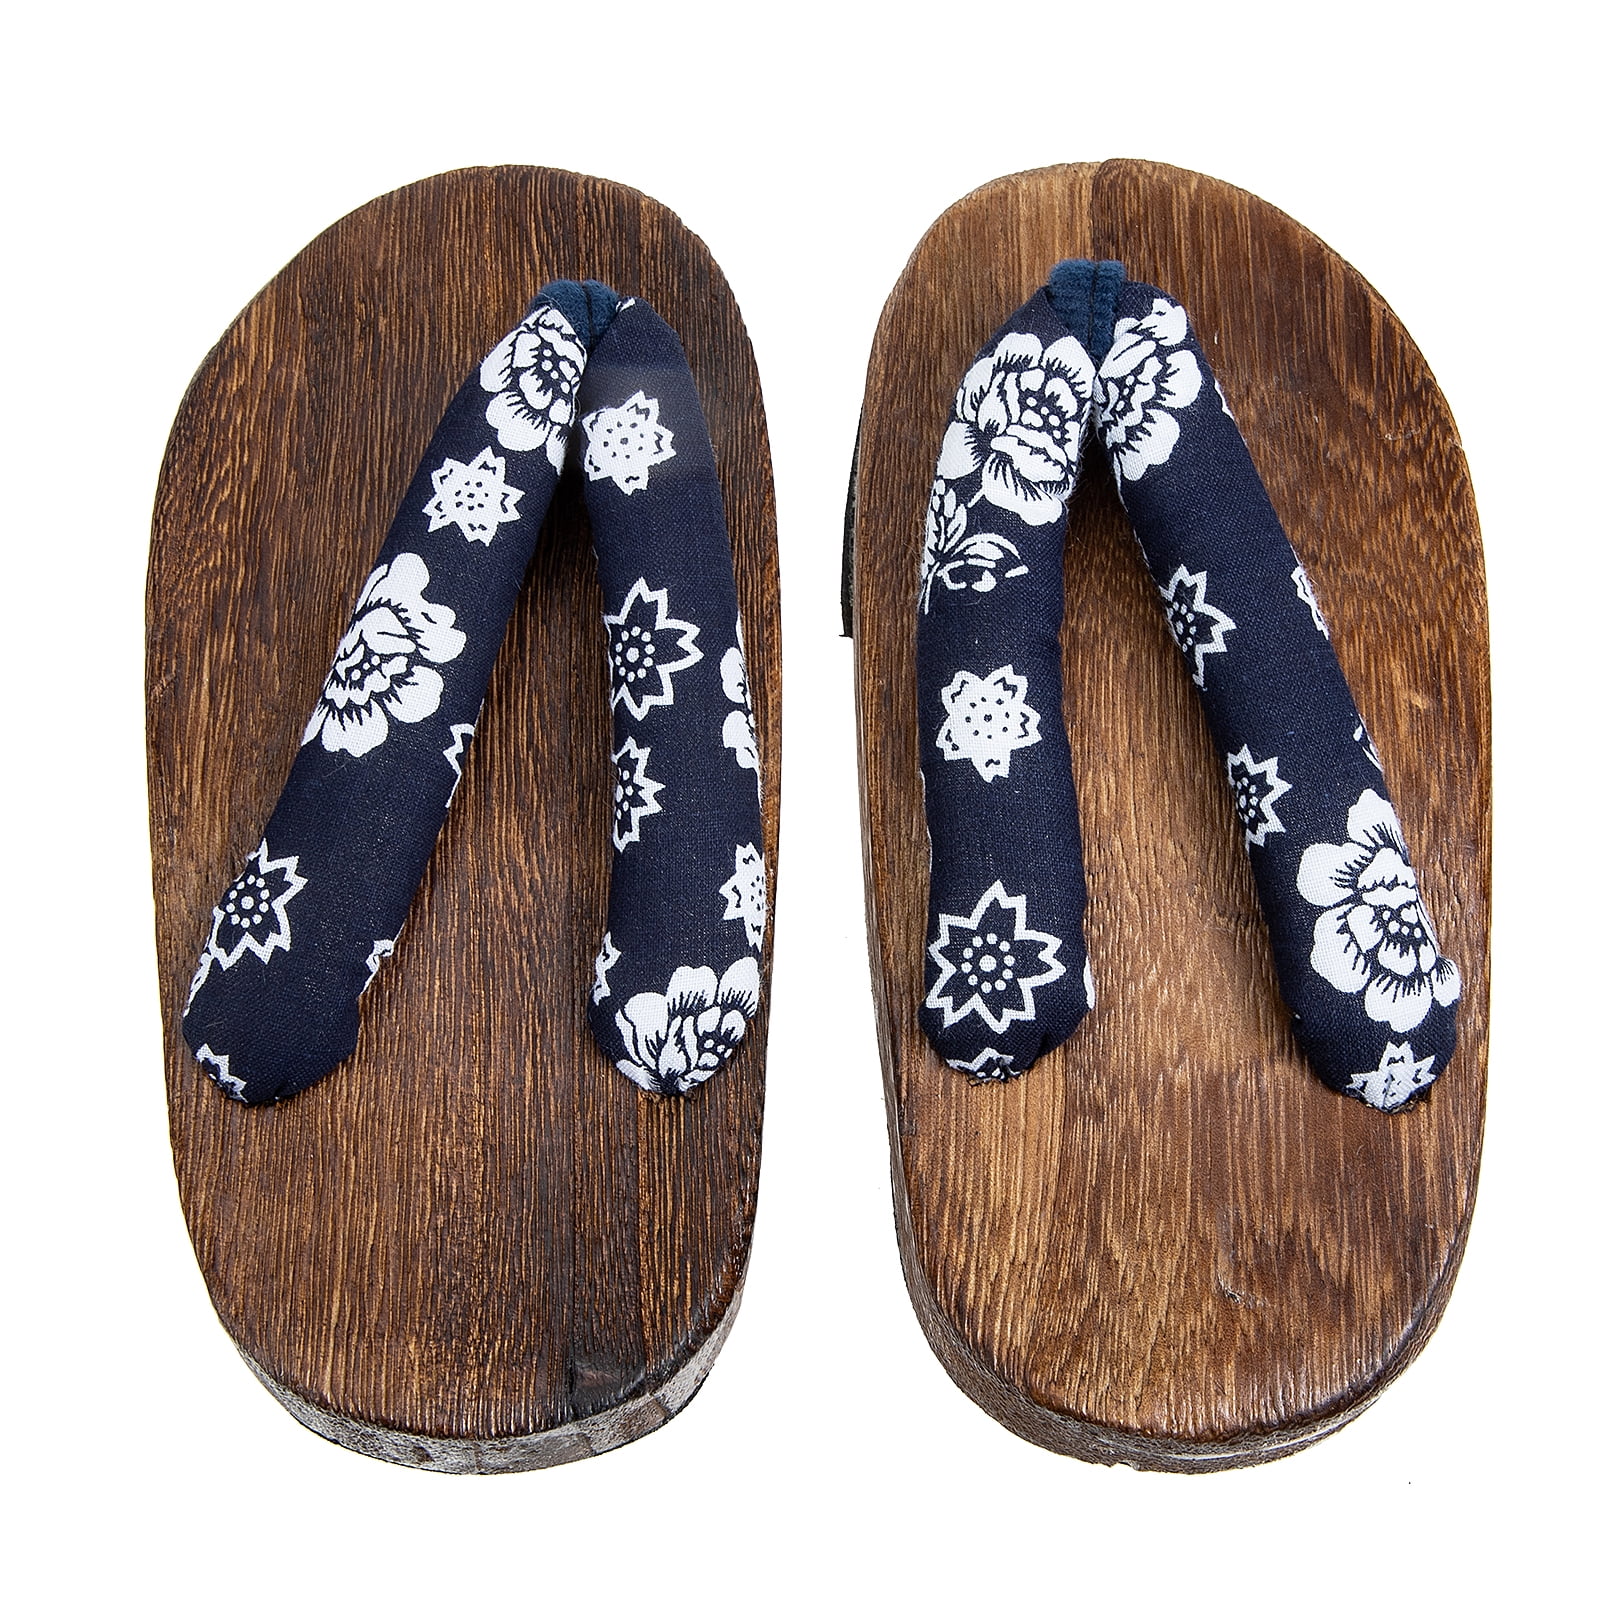 Buy Ecoman wooden slippers & flip - flop (Black, numeric_8) at Amazon.in-thanhphatduhoc.com.vn